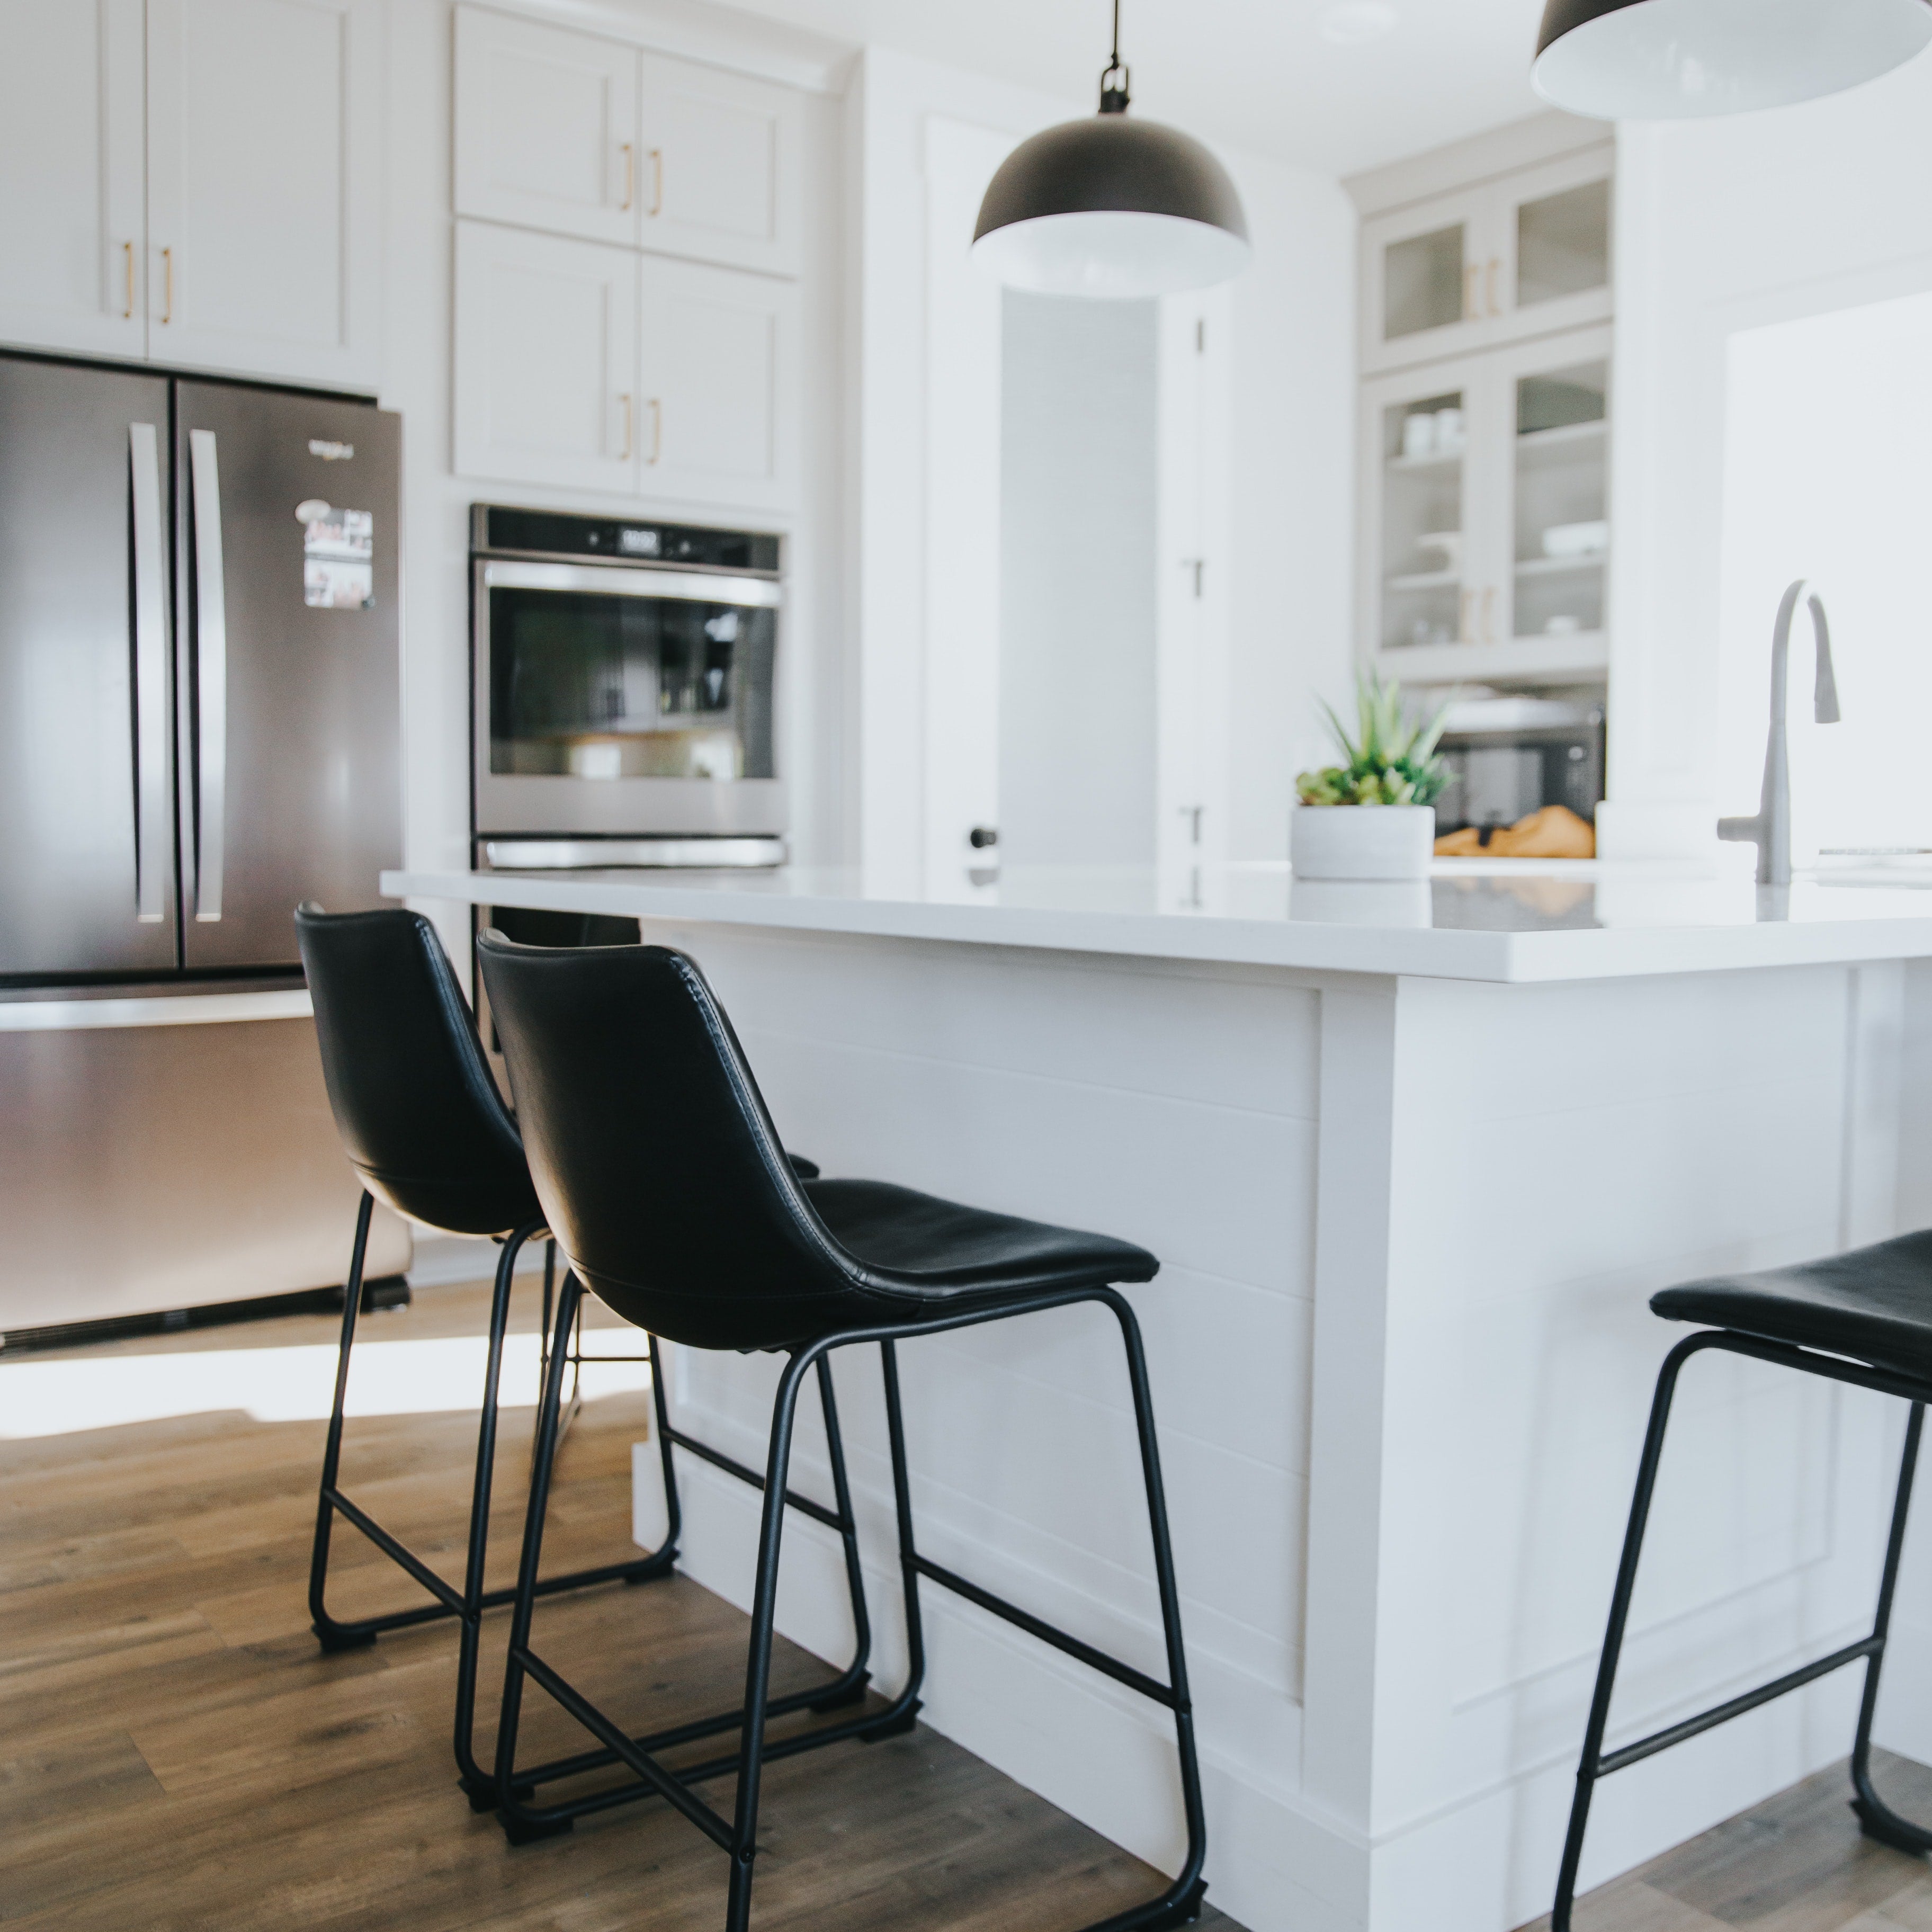 When deciding on countertops, durability, price, appearance and eco-friendliness are some of the factors you should consider before your purchase